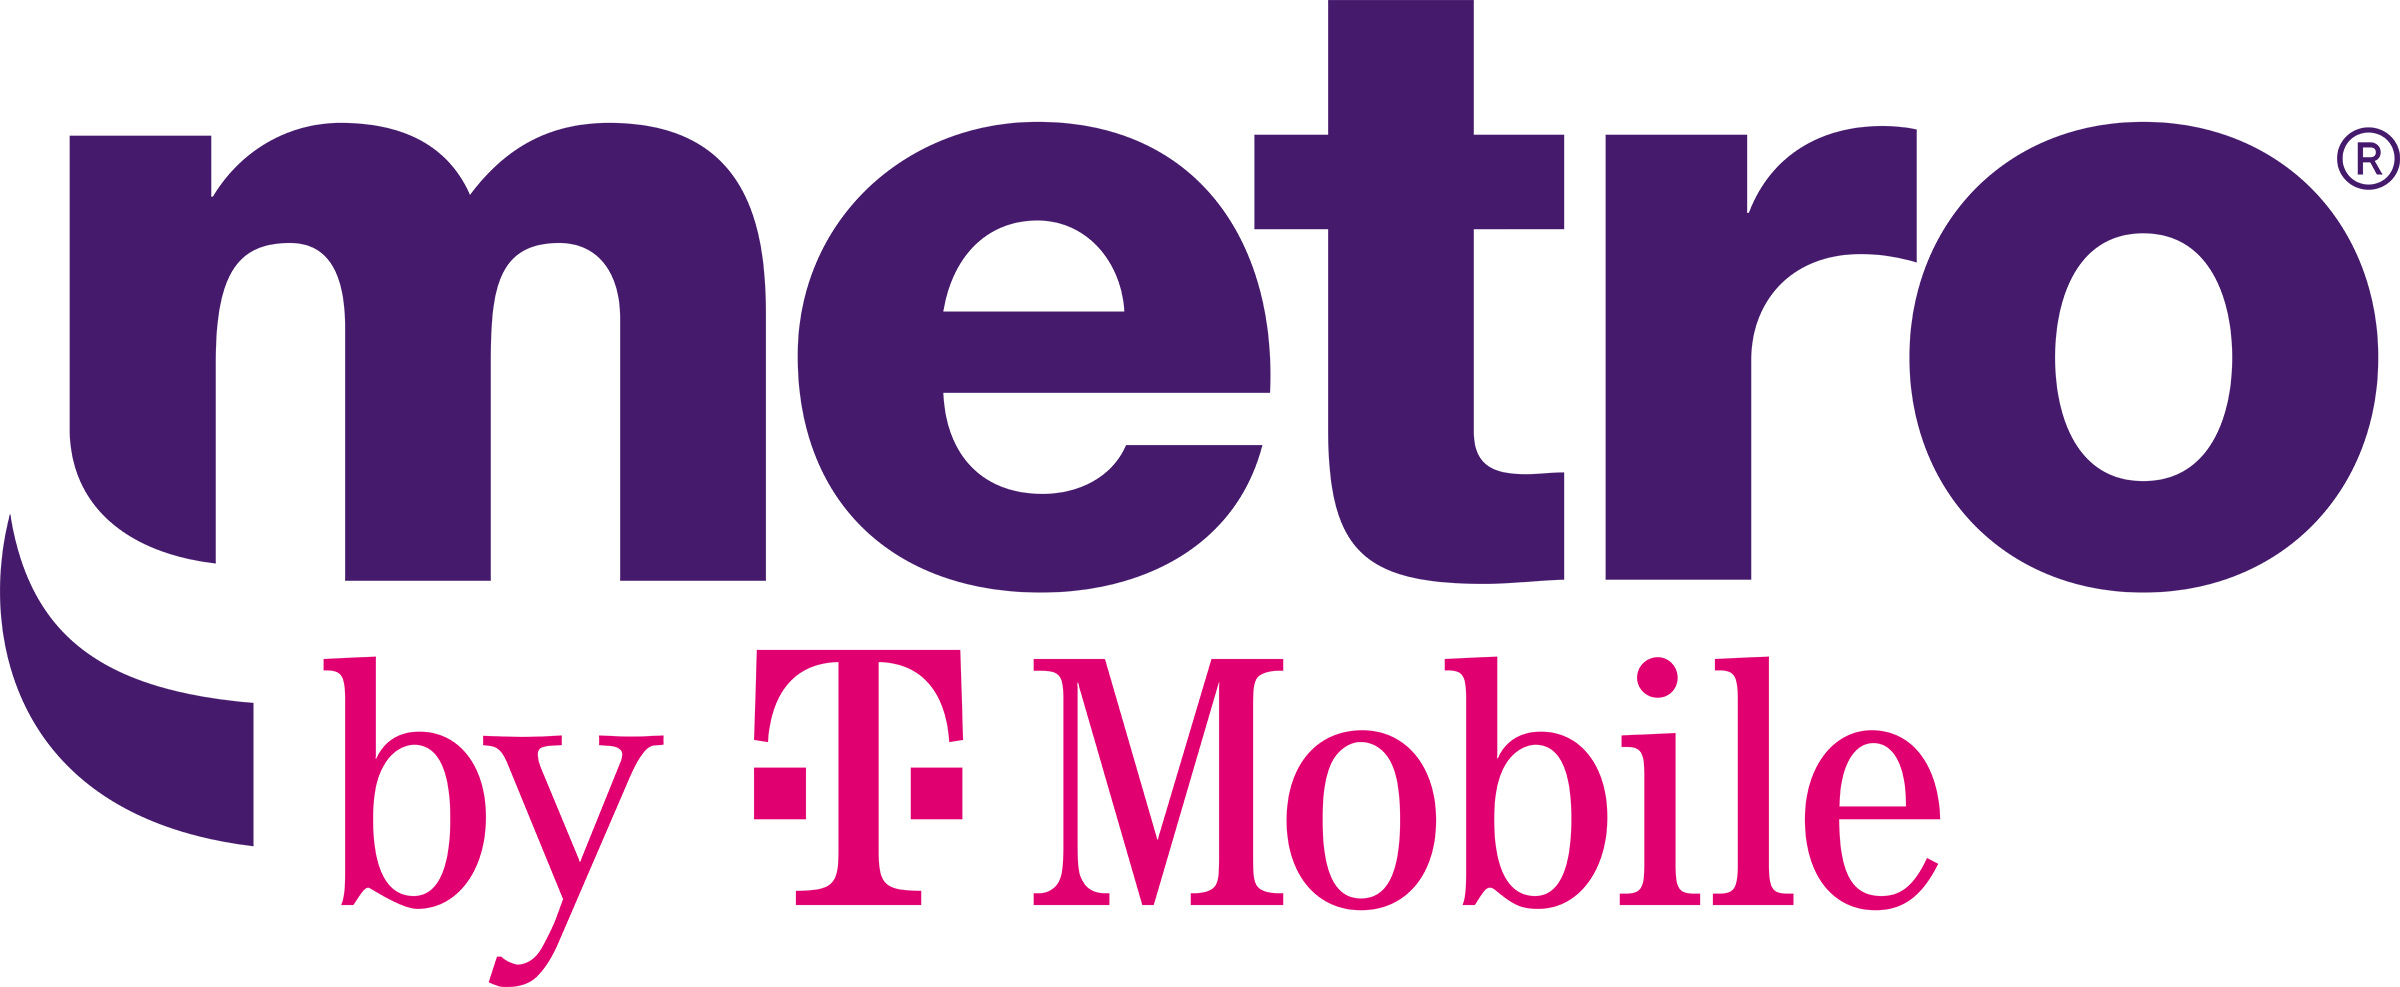 Metro by T-Mobile - Best T-Mobile cheap plan with unlimited data